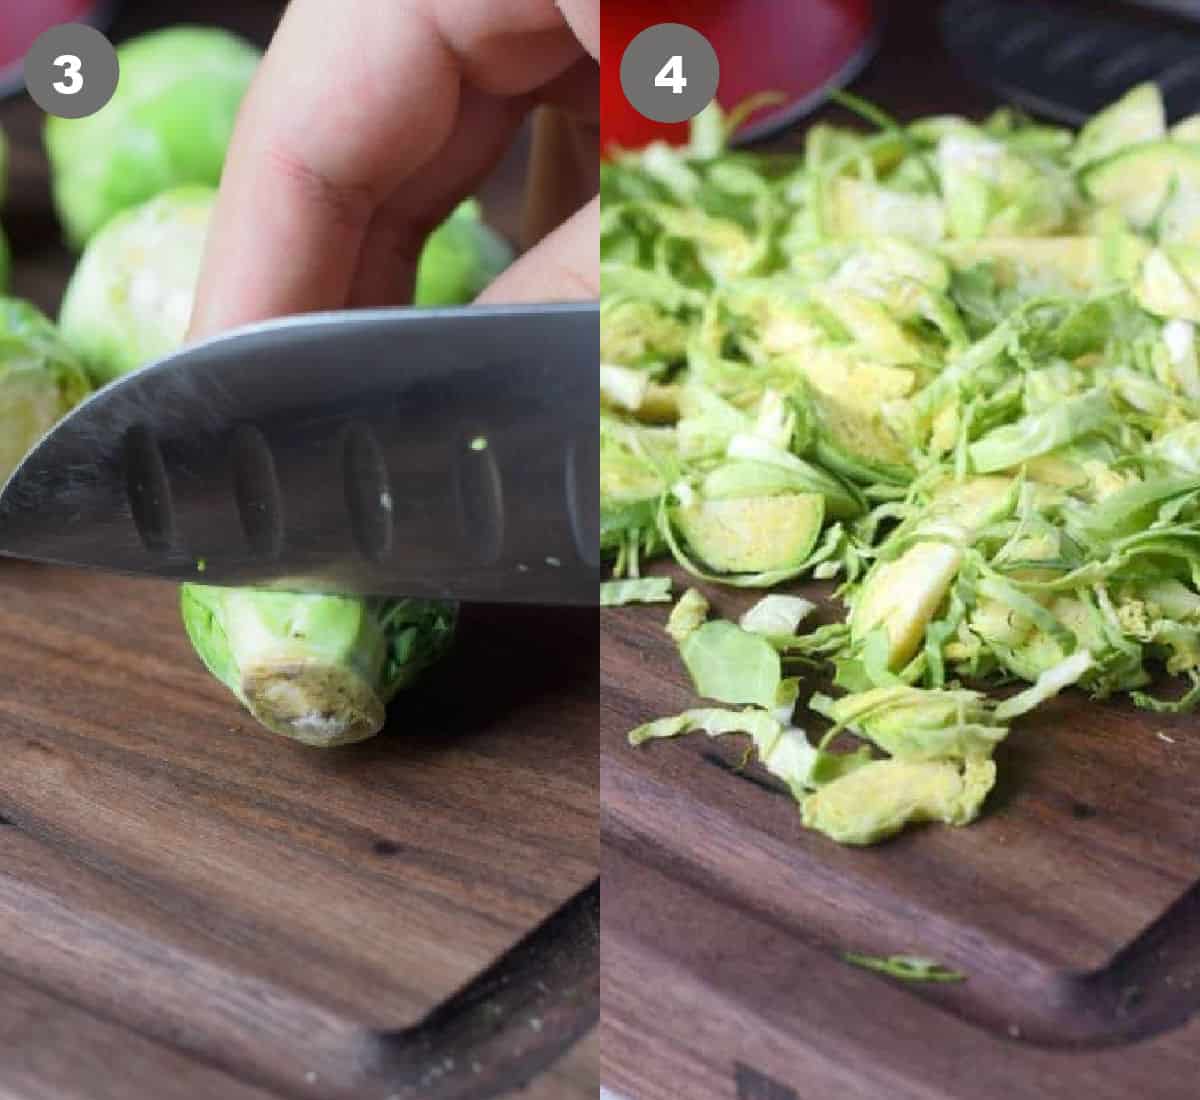 The end of a brussel sprout being sliced off and shredded.